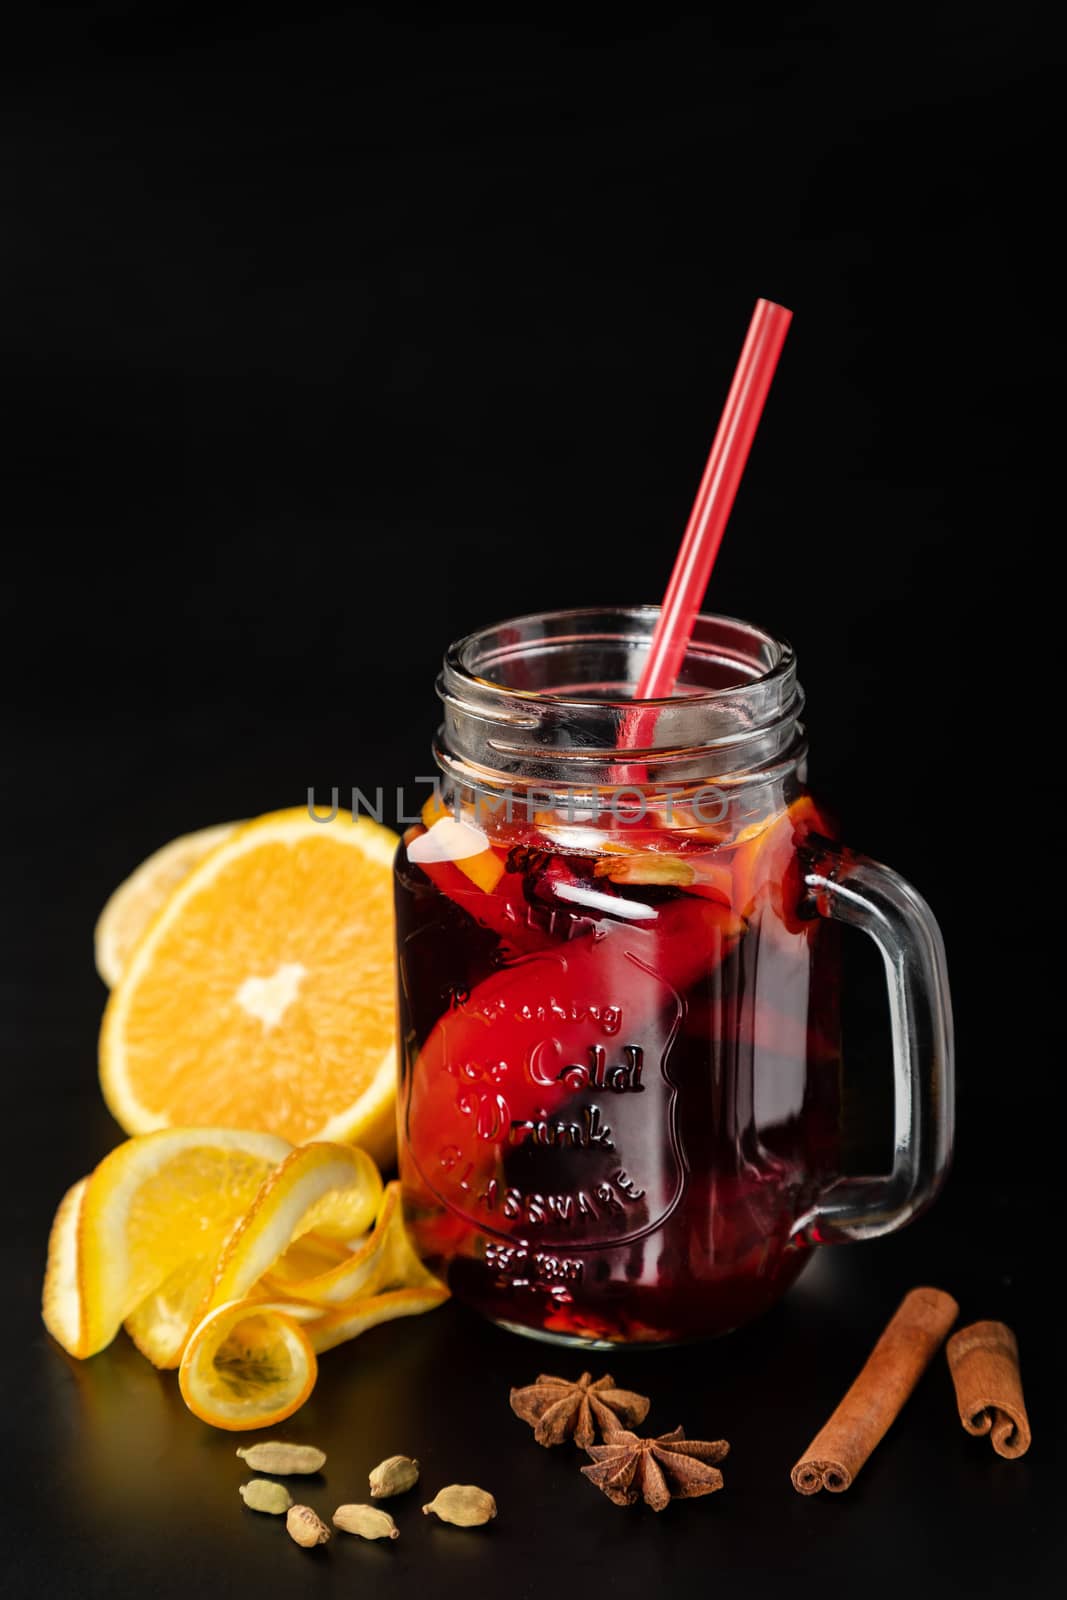 Mulled wine in a glass mug with fruits and spices on a plain black background